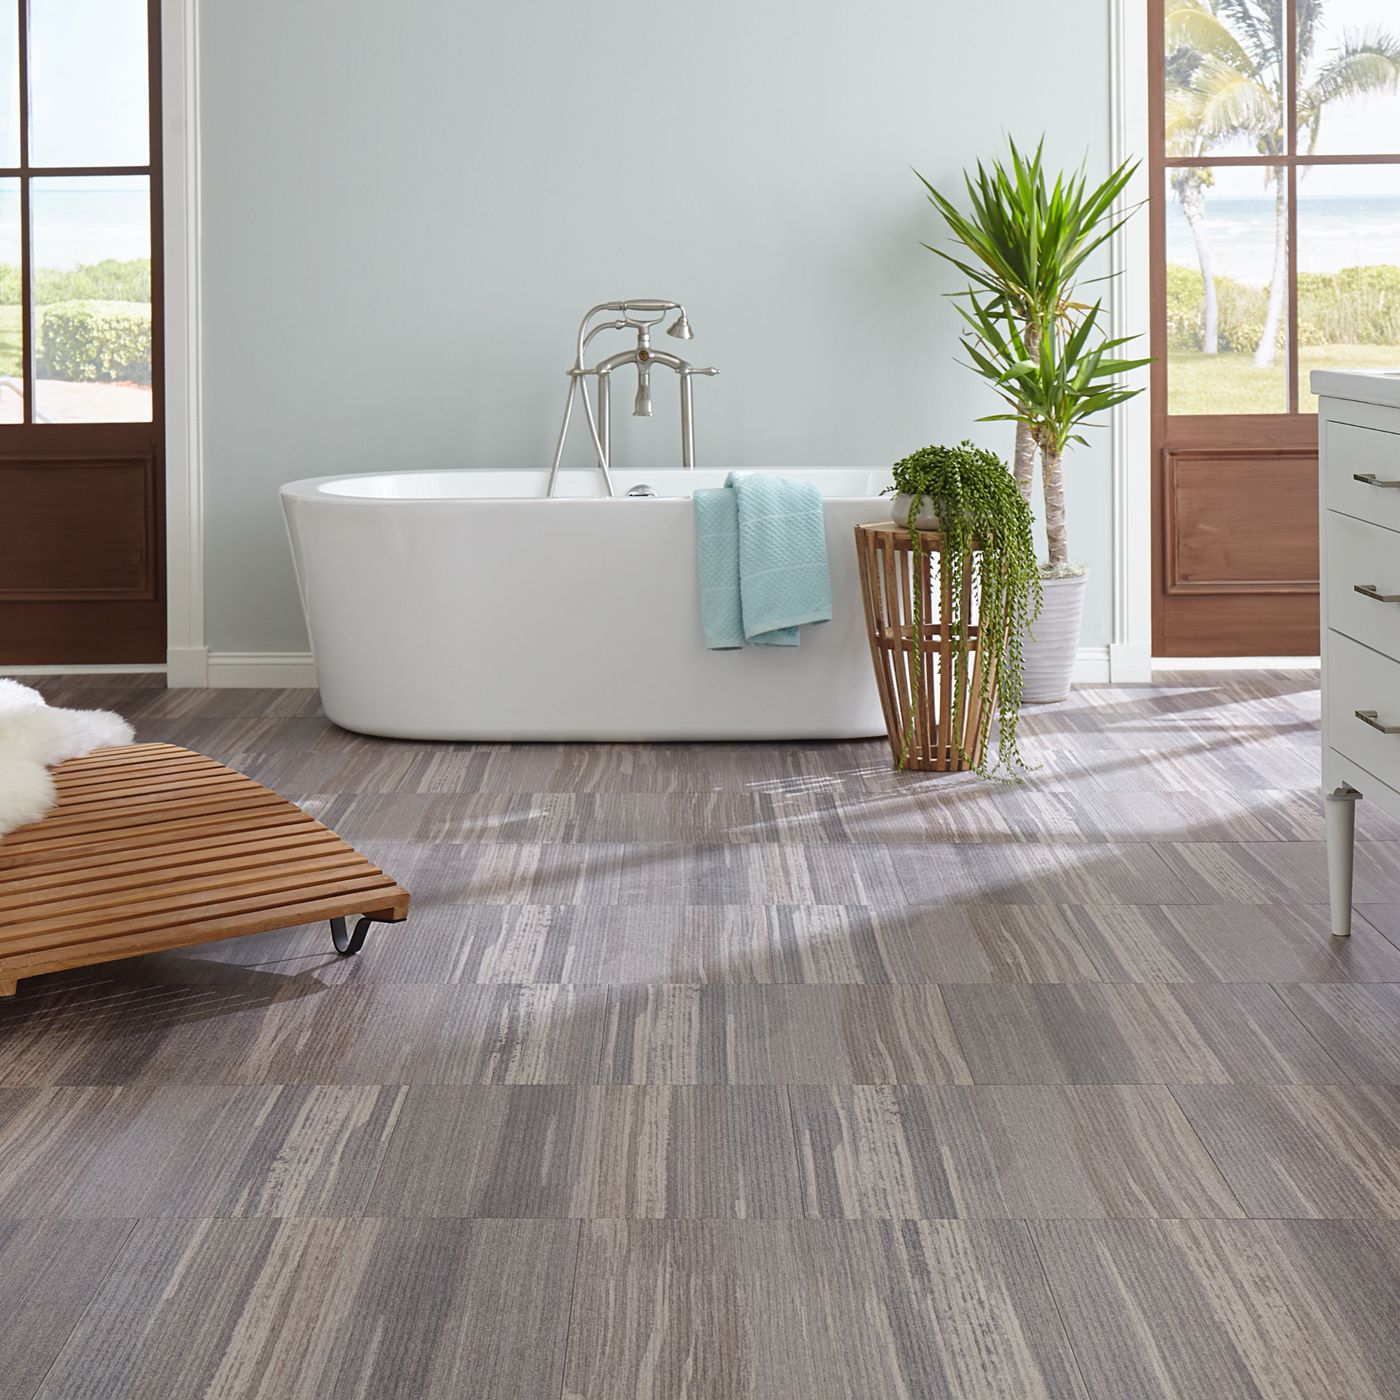 Best Vinyl Flooring for Bathrooms - This Old House